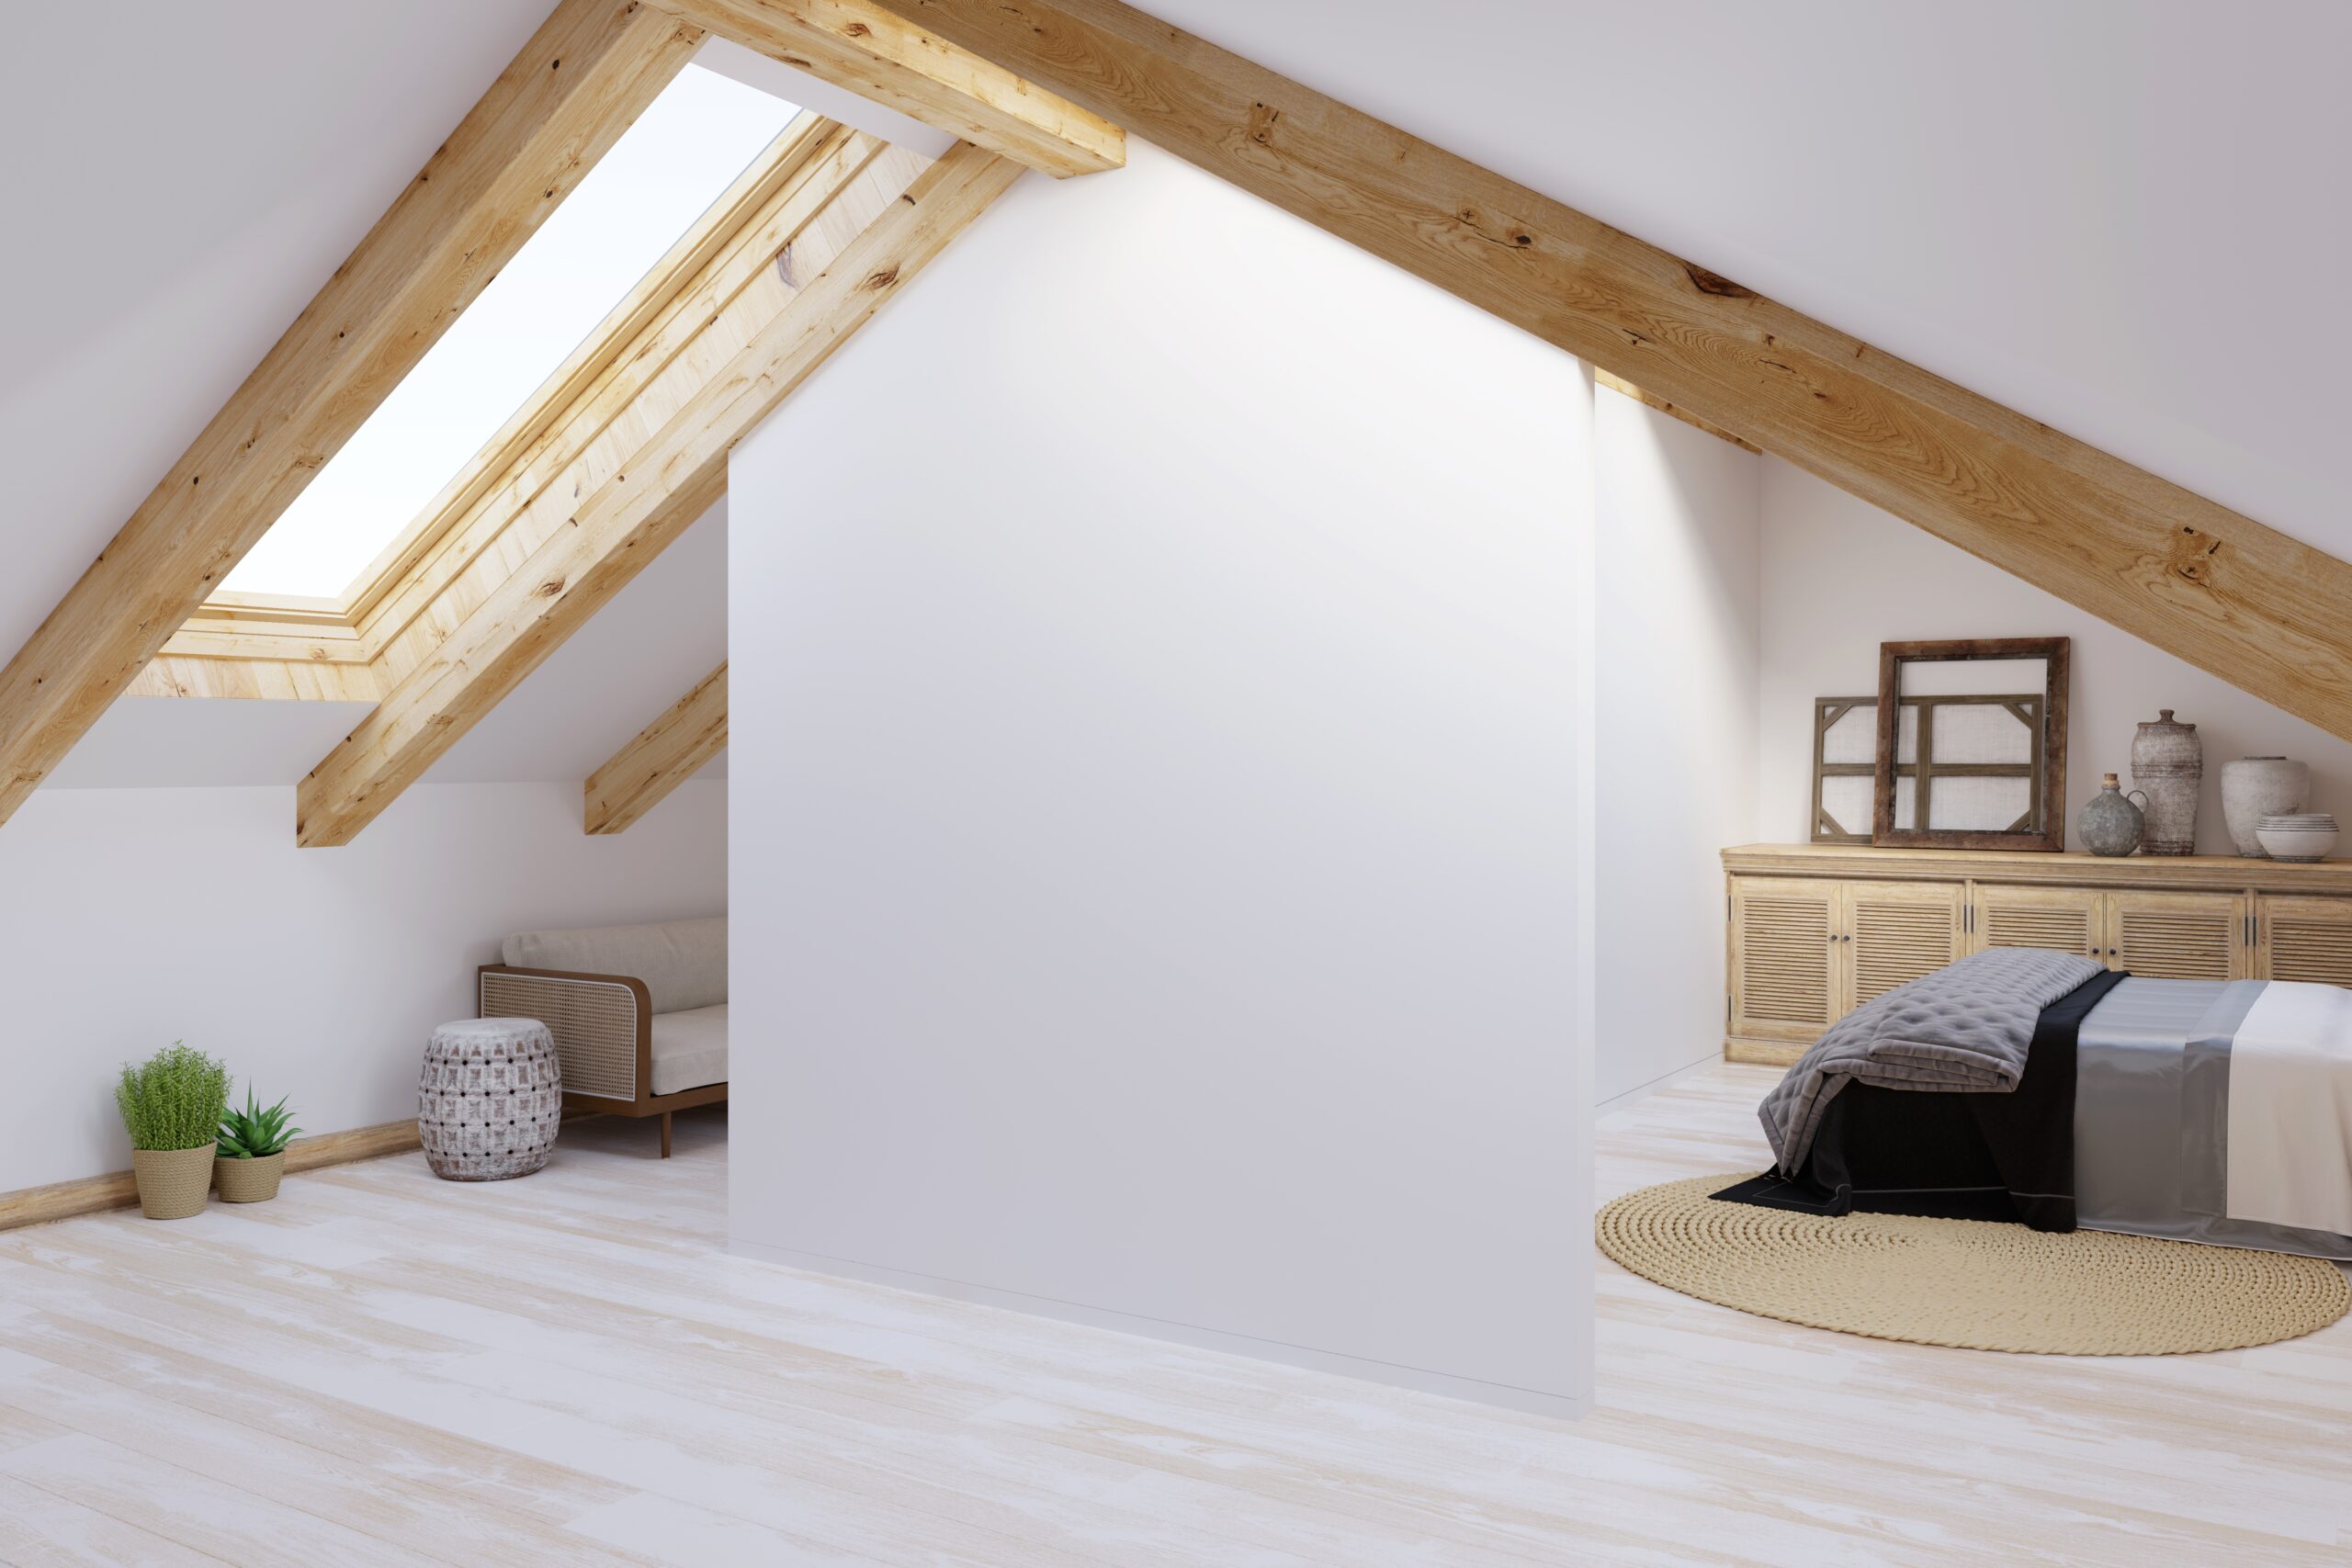 Dormer loft converted into bedroom with natural light